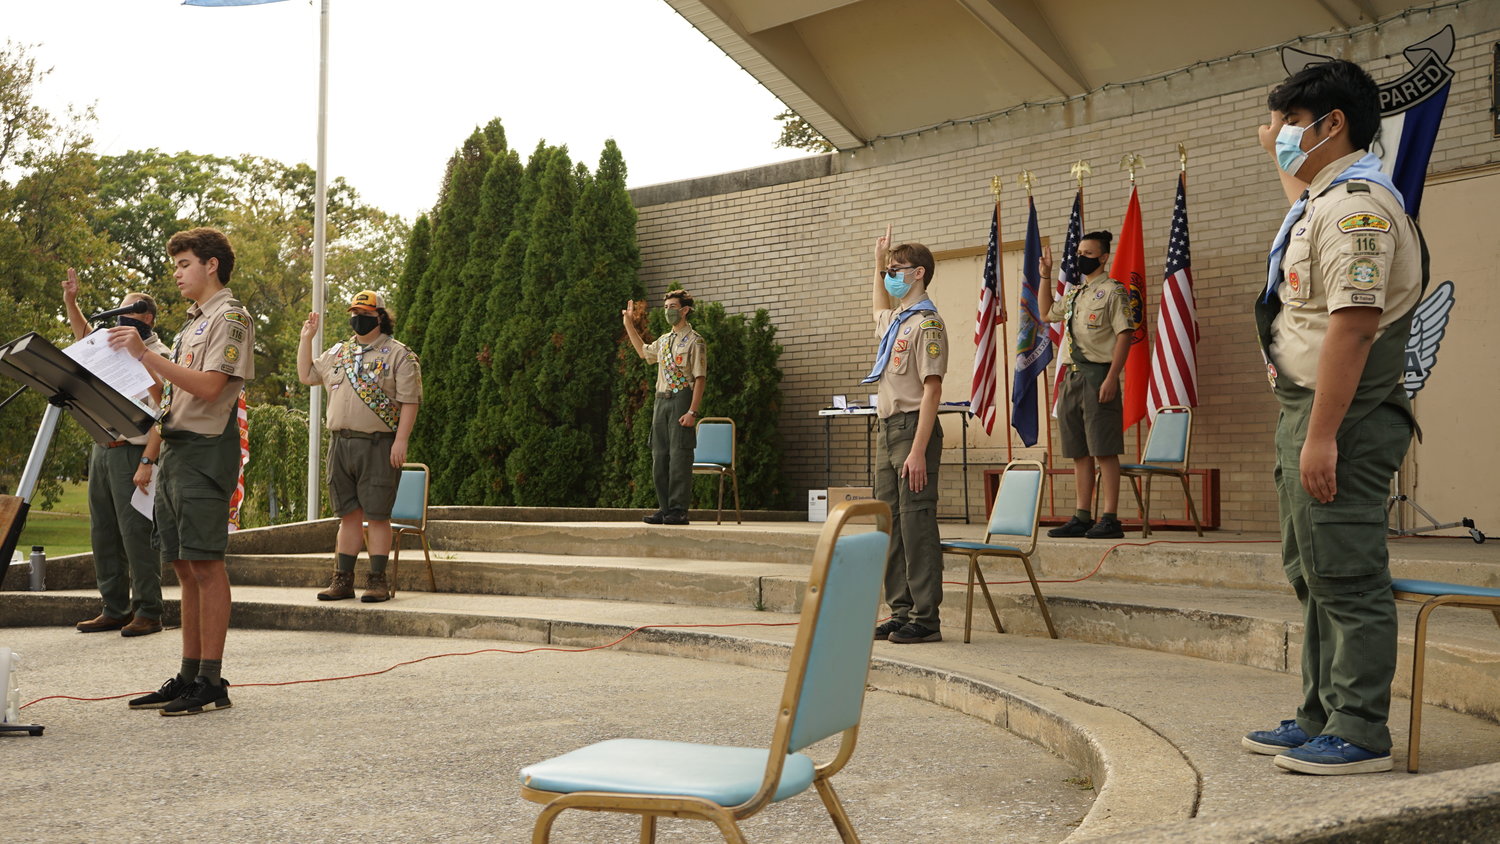 Valley Stream Troop 116 scouts Ian Burke, standing from left, Owen Bogle and Brandon Yu officially reached the rank of Eagle on Saturday, Oct. 10.